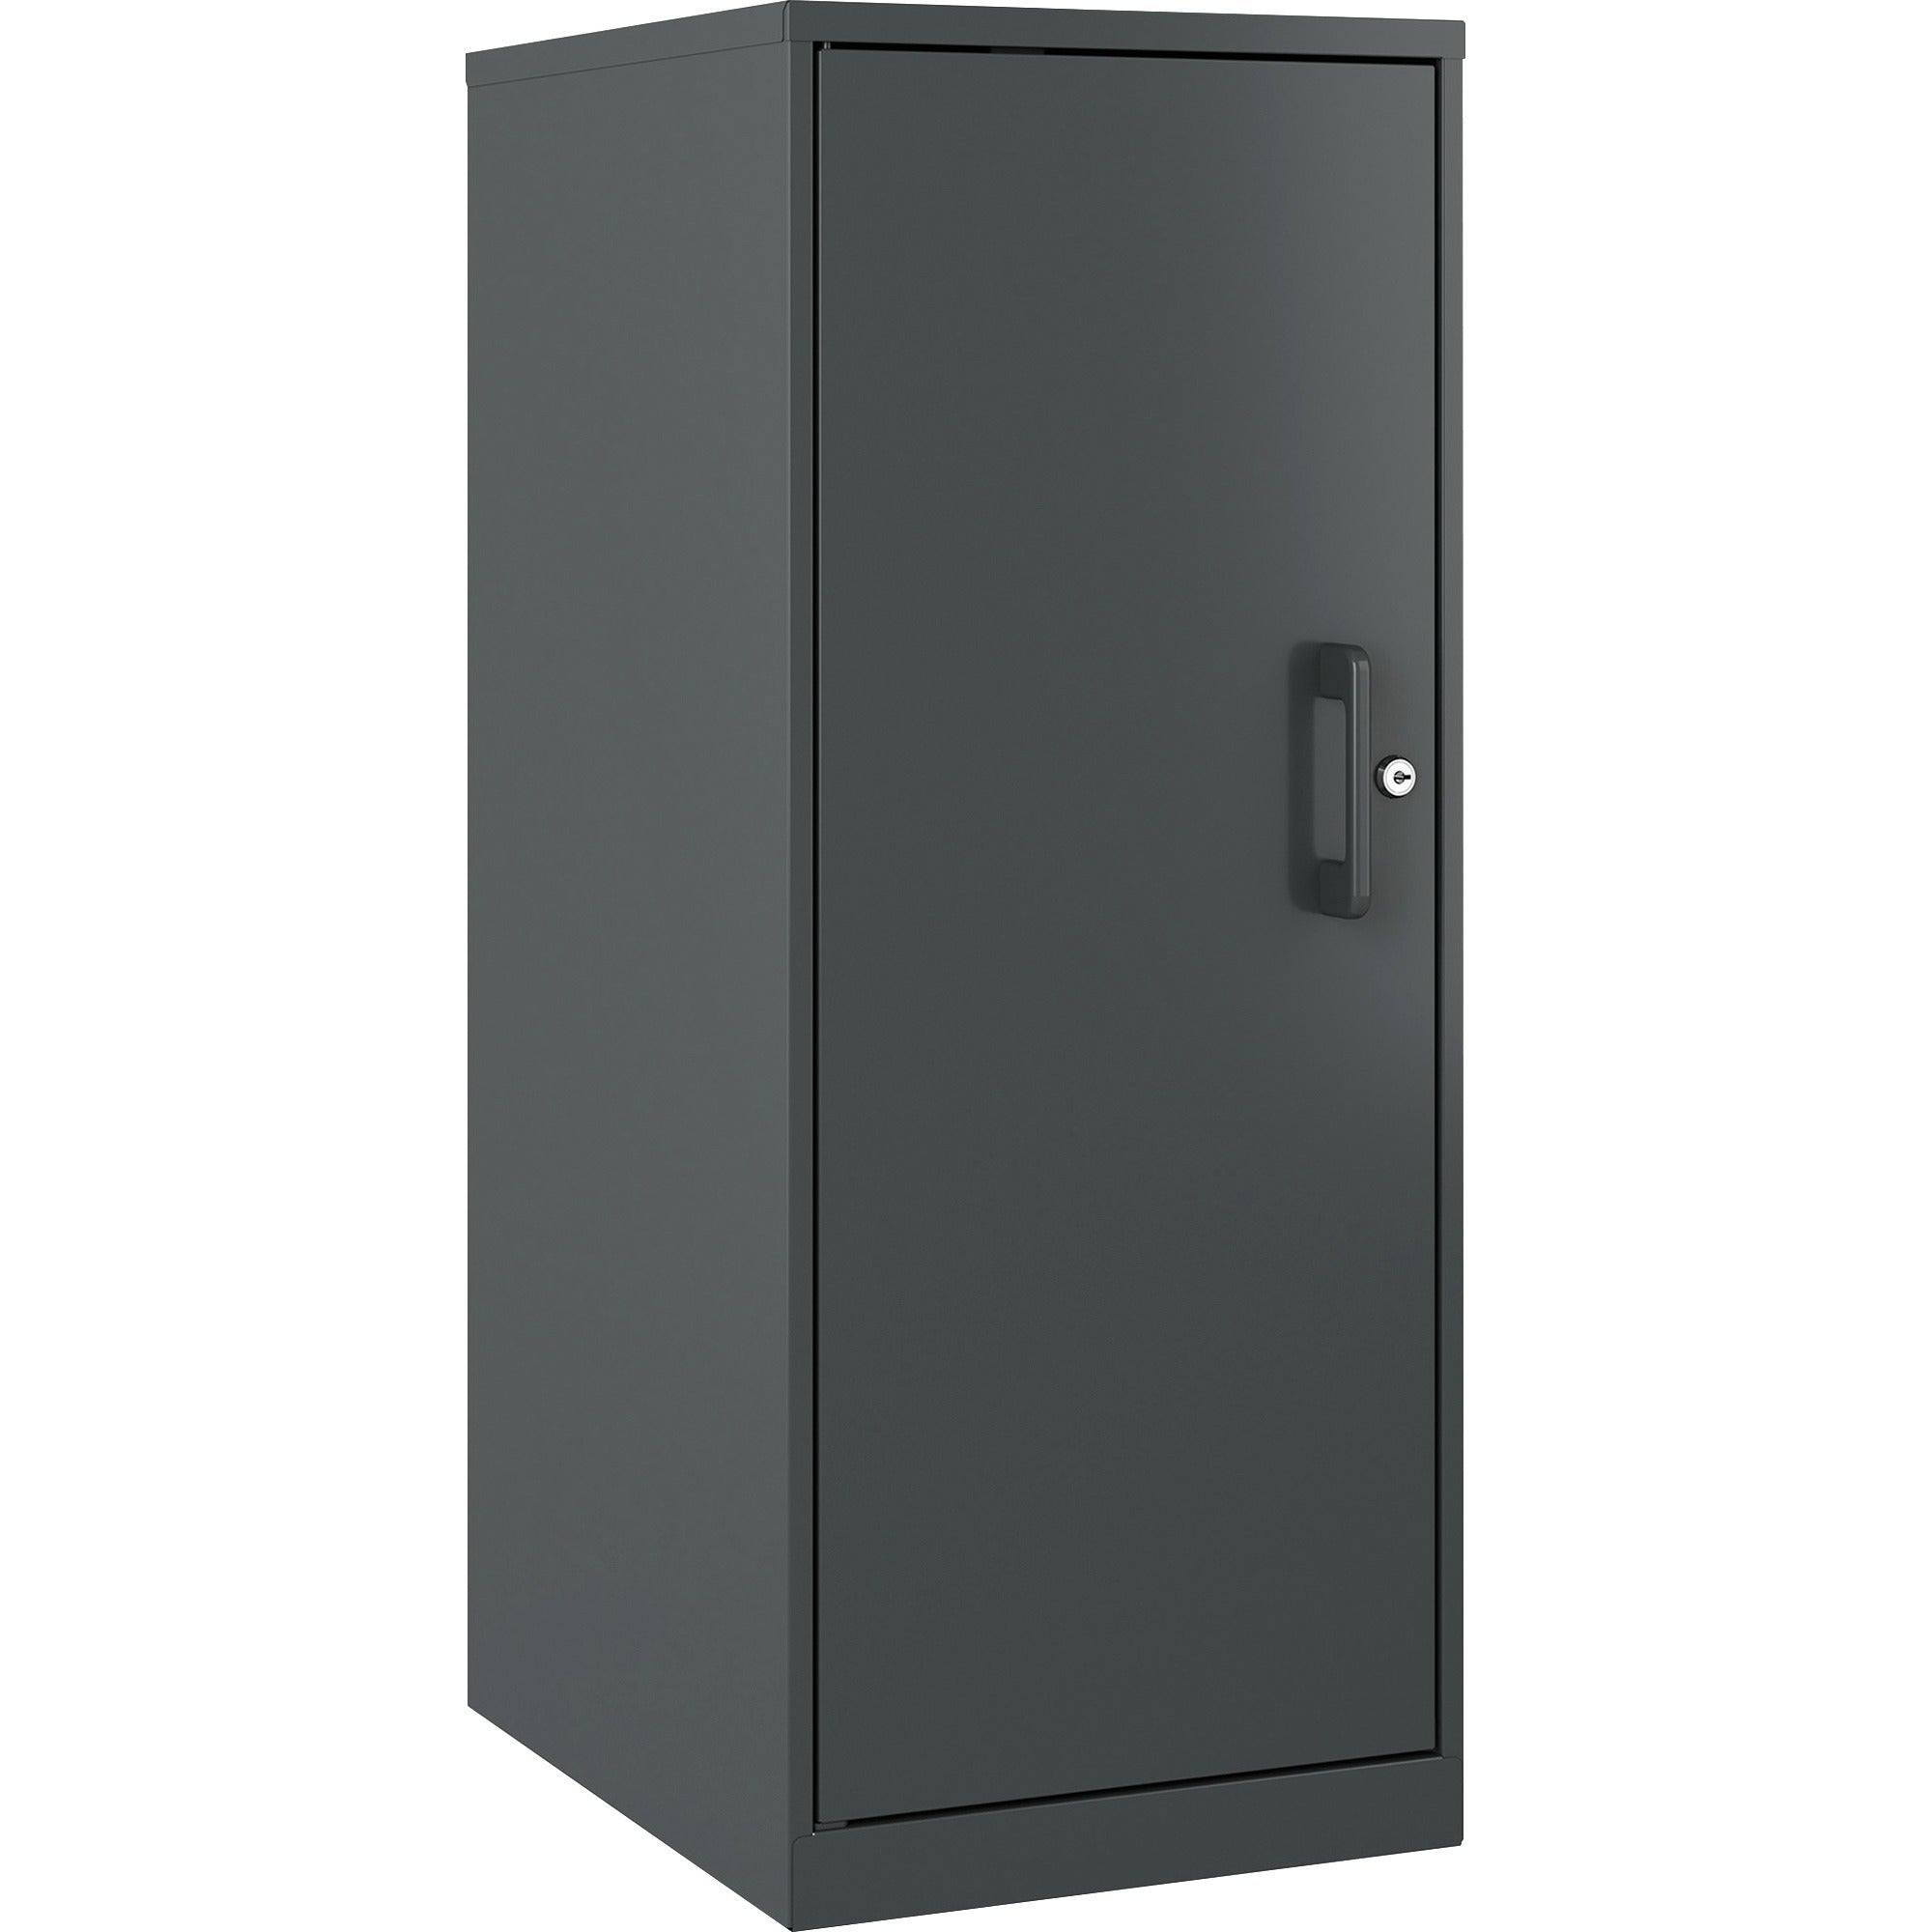 nusparc-personal-storage-cabinet-18-x-142-x-325-3-x-shelfves-hinged-doors-sturdy-durable-welded-eco-friendly-nonporous-surface-locking-mechanism-ventilated-locking-door-graphite-steel-recycled-taa-compliant_nprsc318zzml - 1